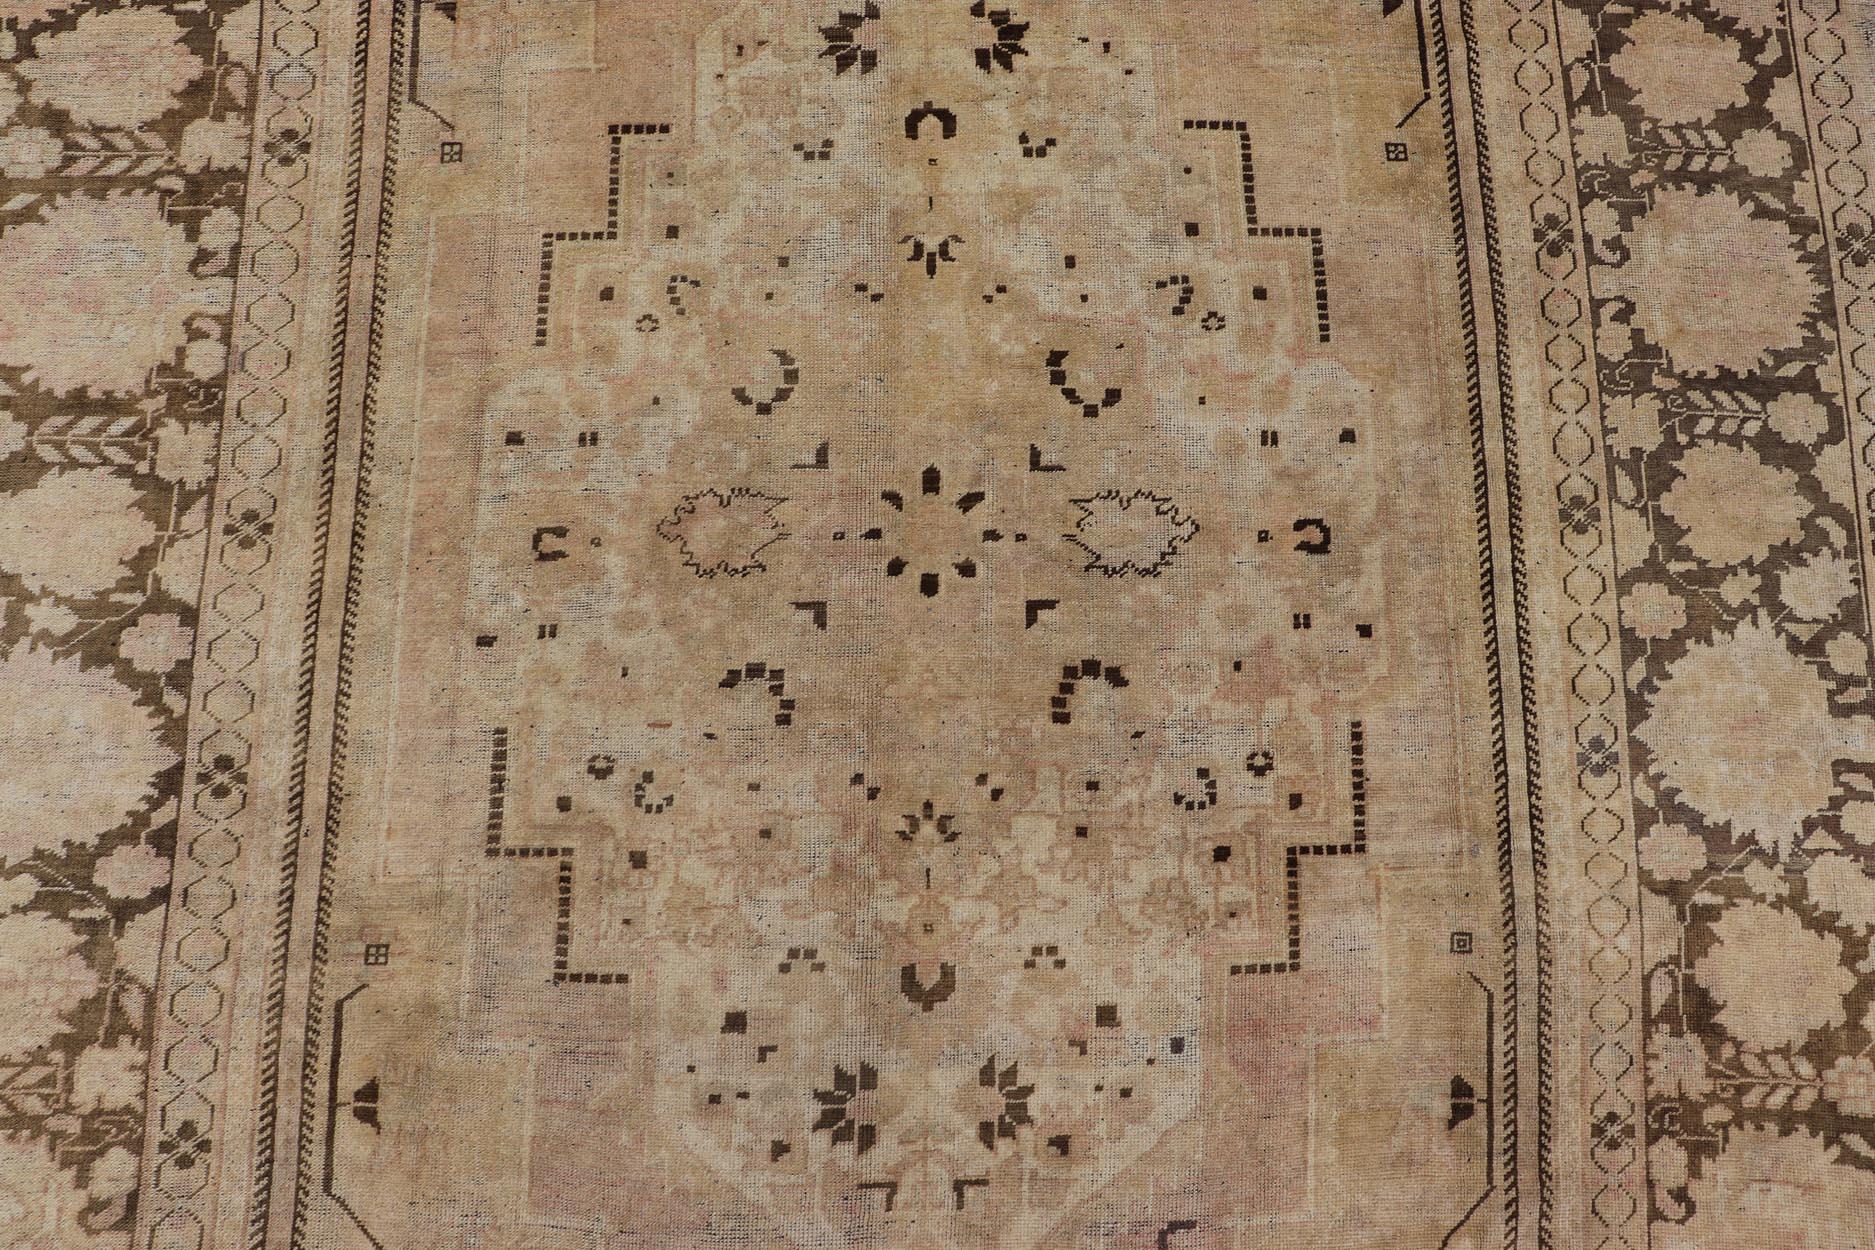 Vintage Oushak Rug with Muted Neutral Colors in Tan, Beige, Taupe, Gray & Brown For Sale 3